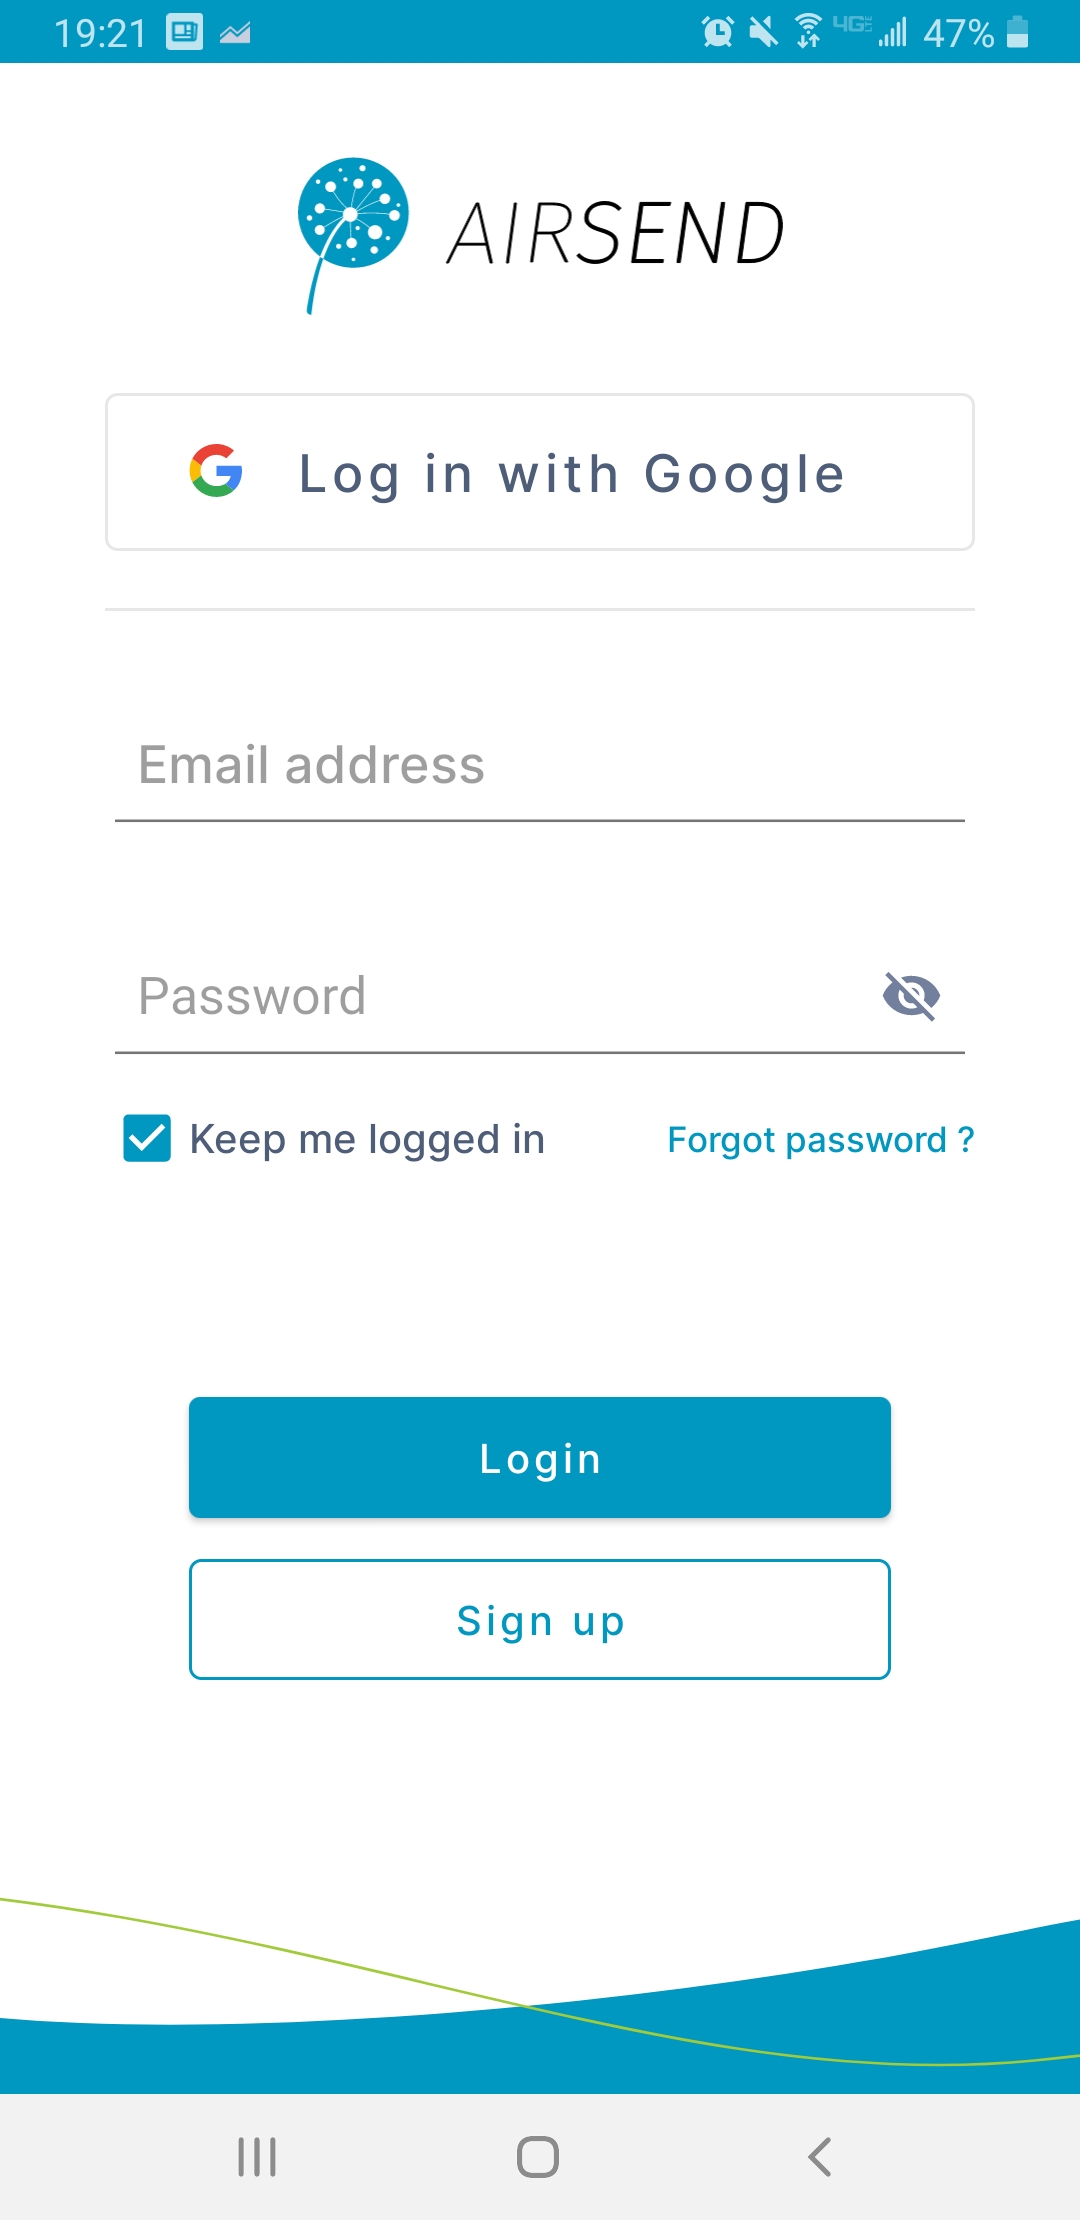 AirSend Android login page image